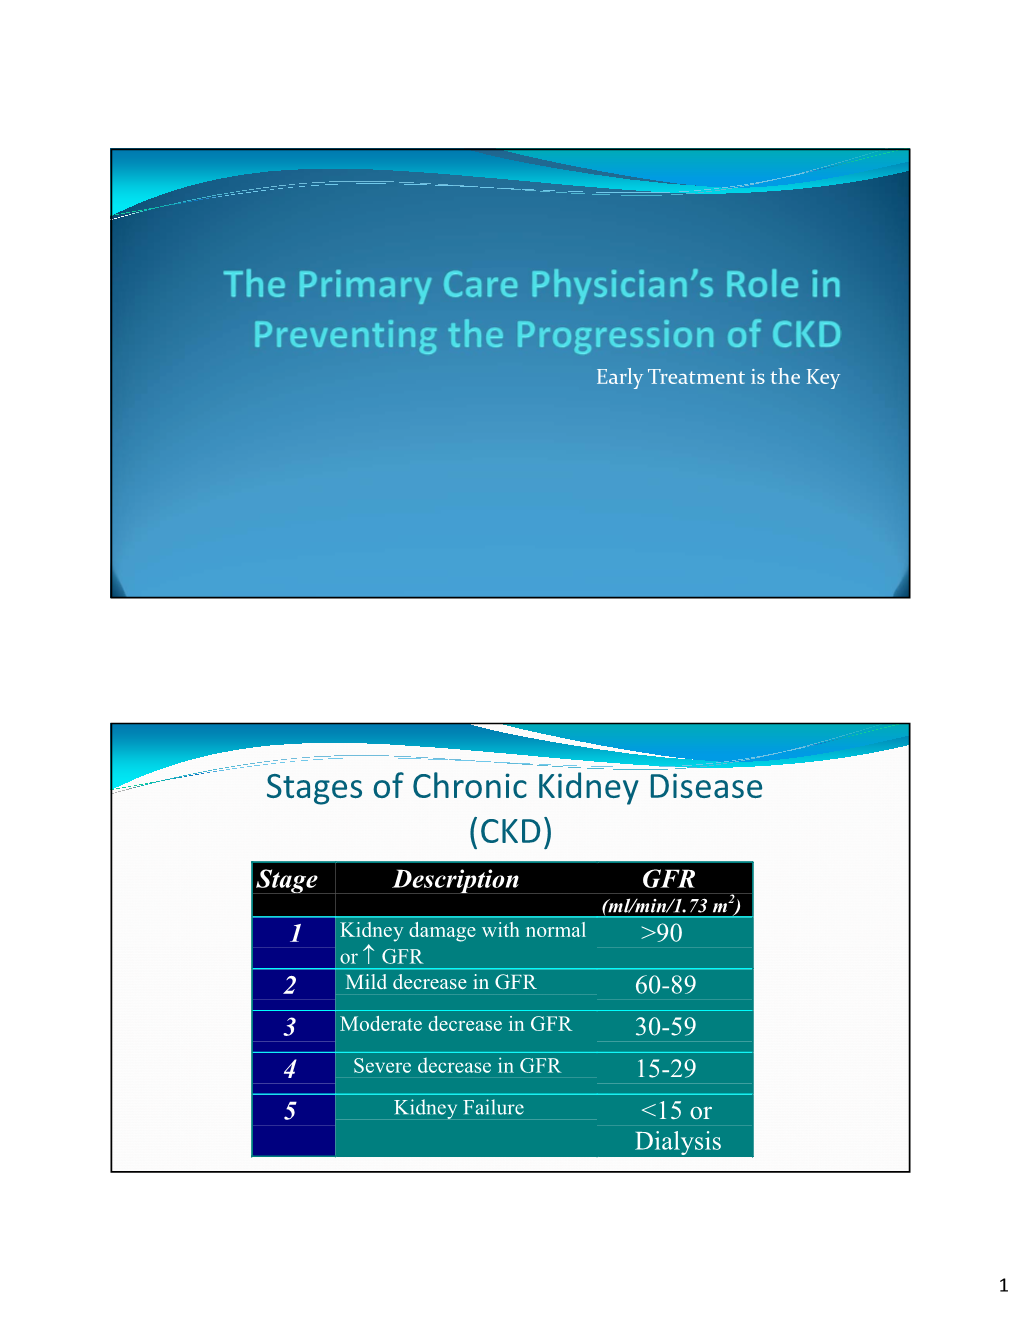 Stages of Chronic Kidney Disease (CKD)